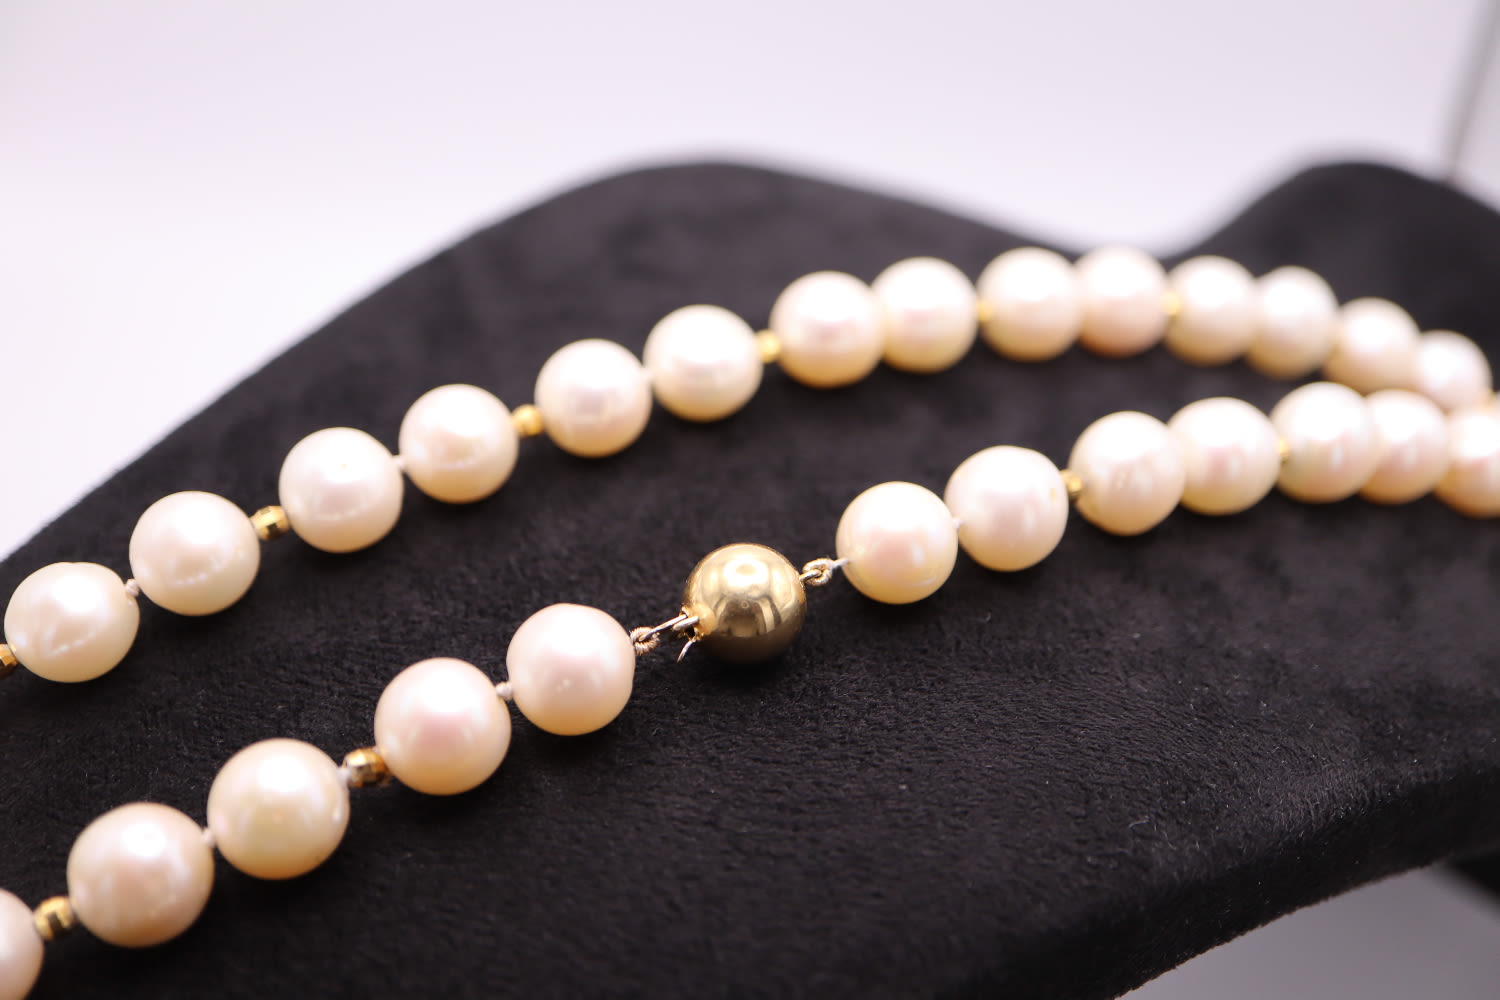 18K YELLOW GOLD & PEARL NECKLACE - Image 3 of 4